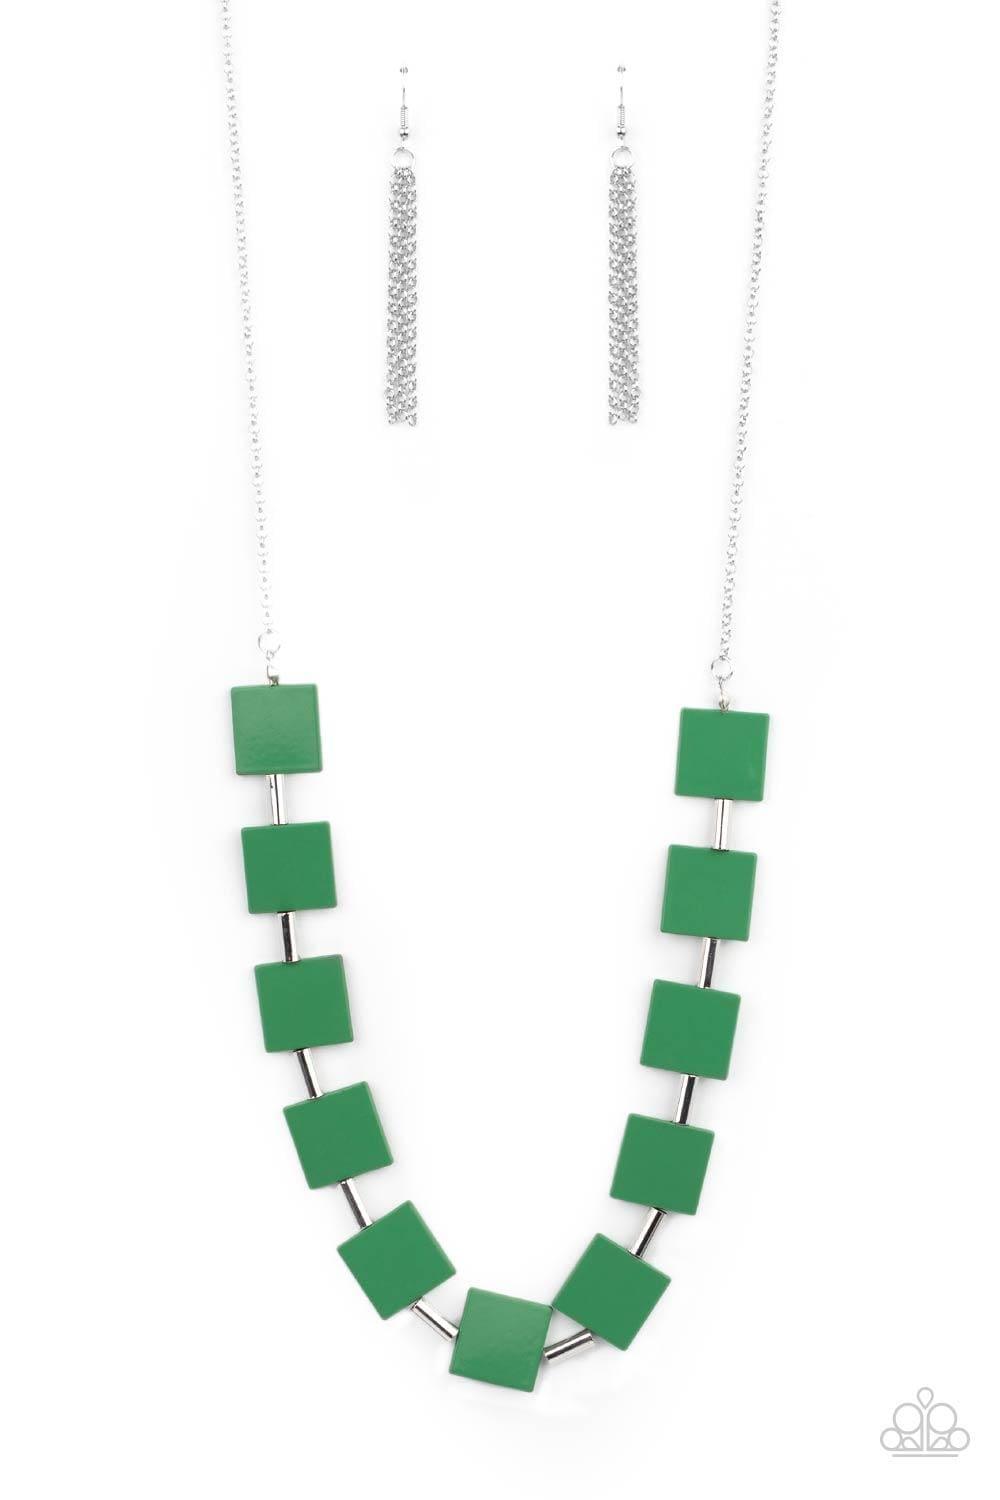 Paparazzi Accessories - Hello, Material Girl - Green Necklace - Bling by JessieK